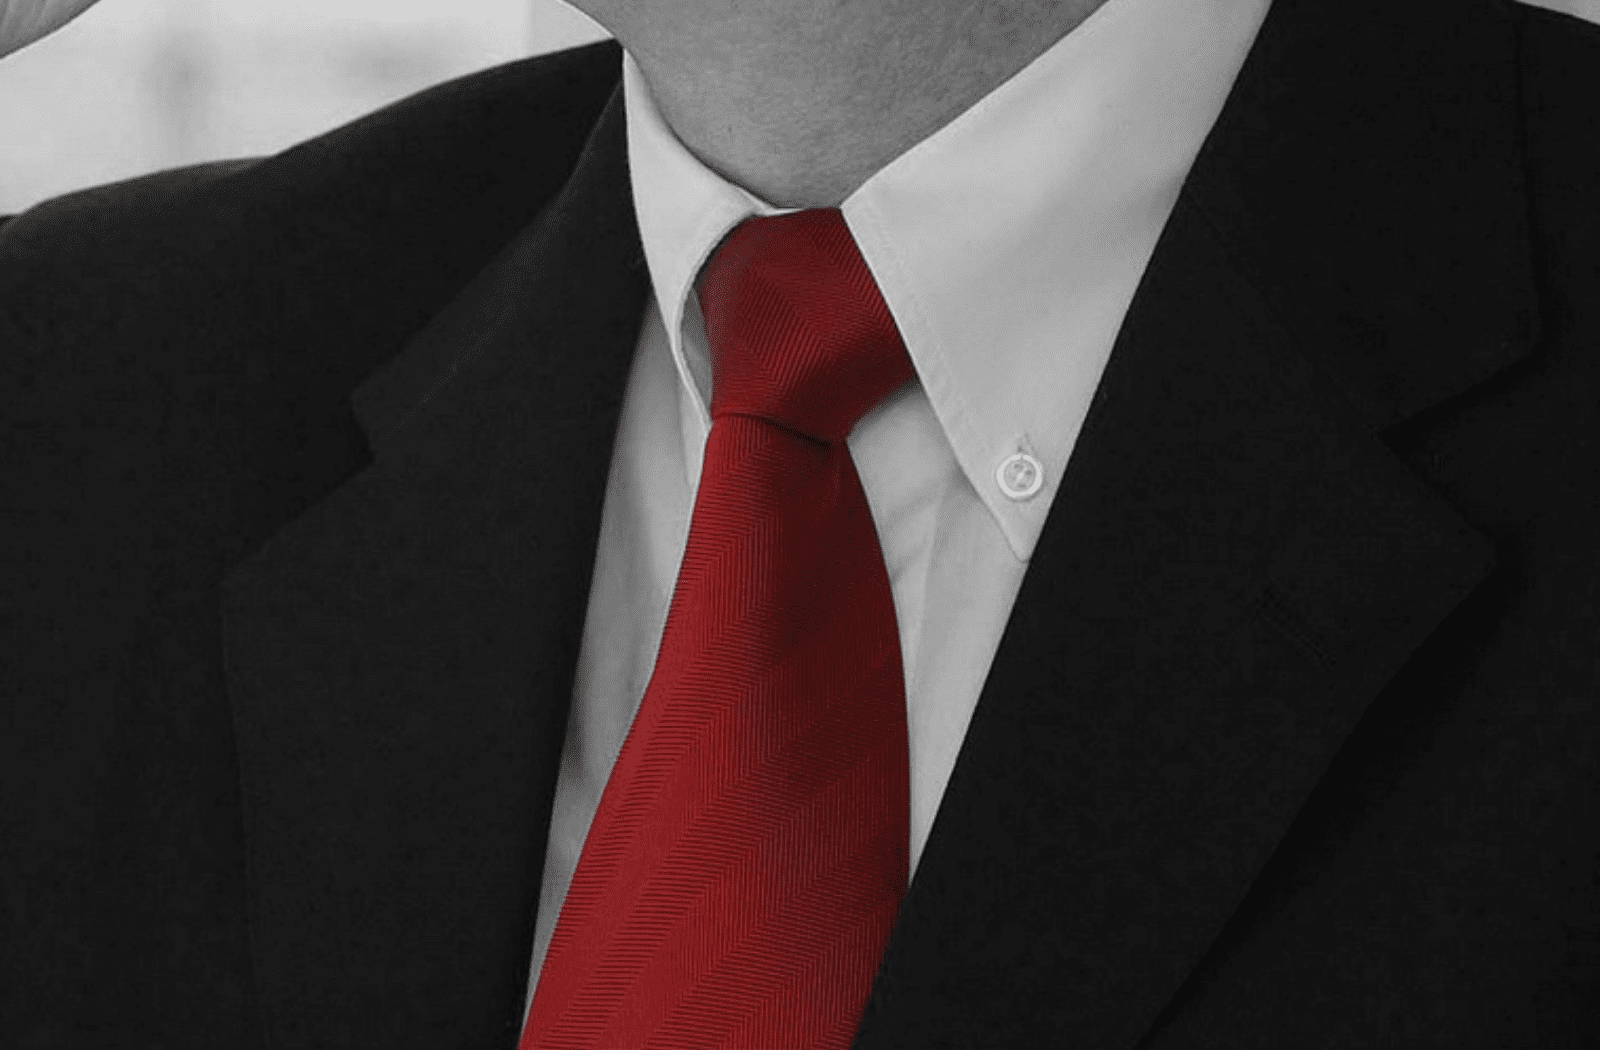 mirror cheat index finger Can you wear a red tie with a black suit? Experts Chime In!